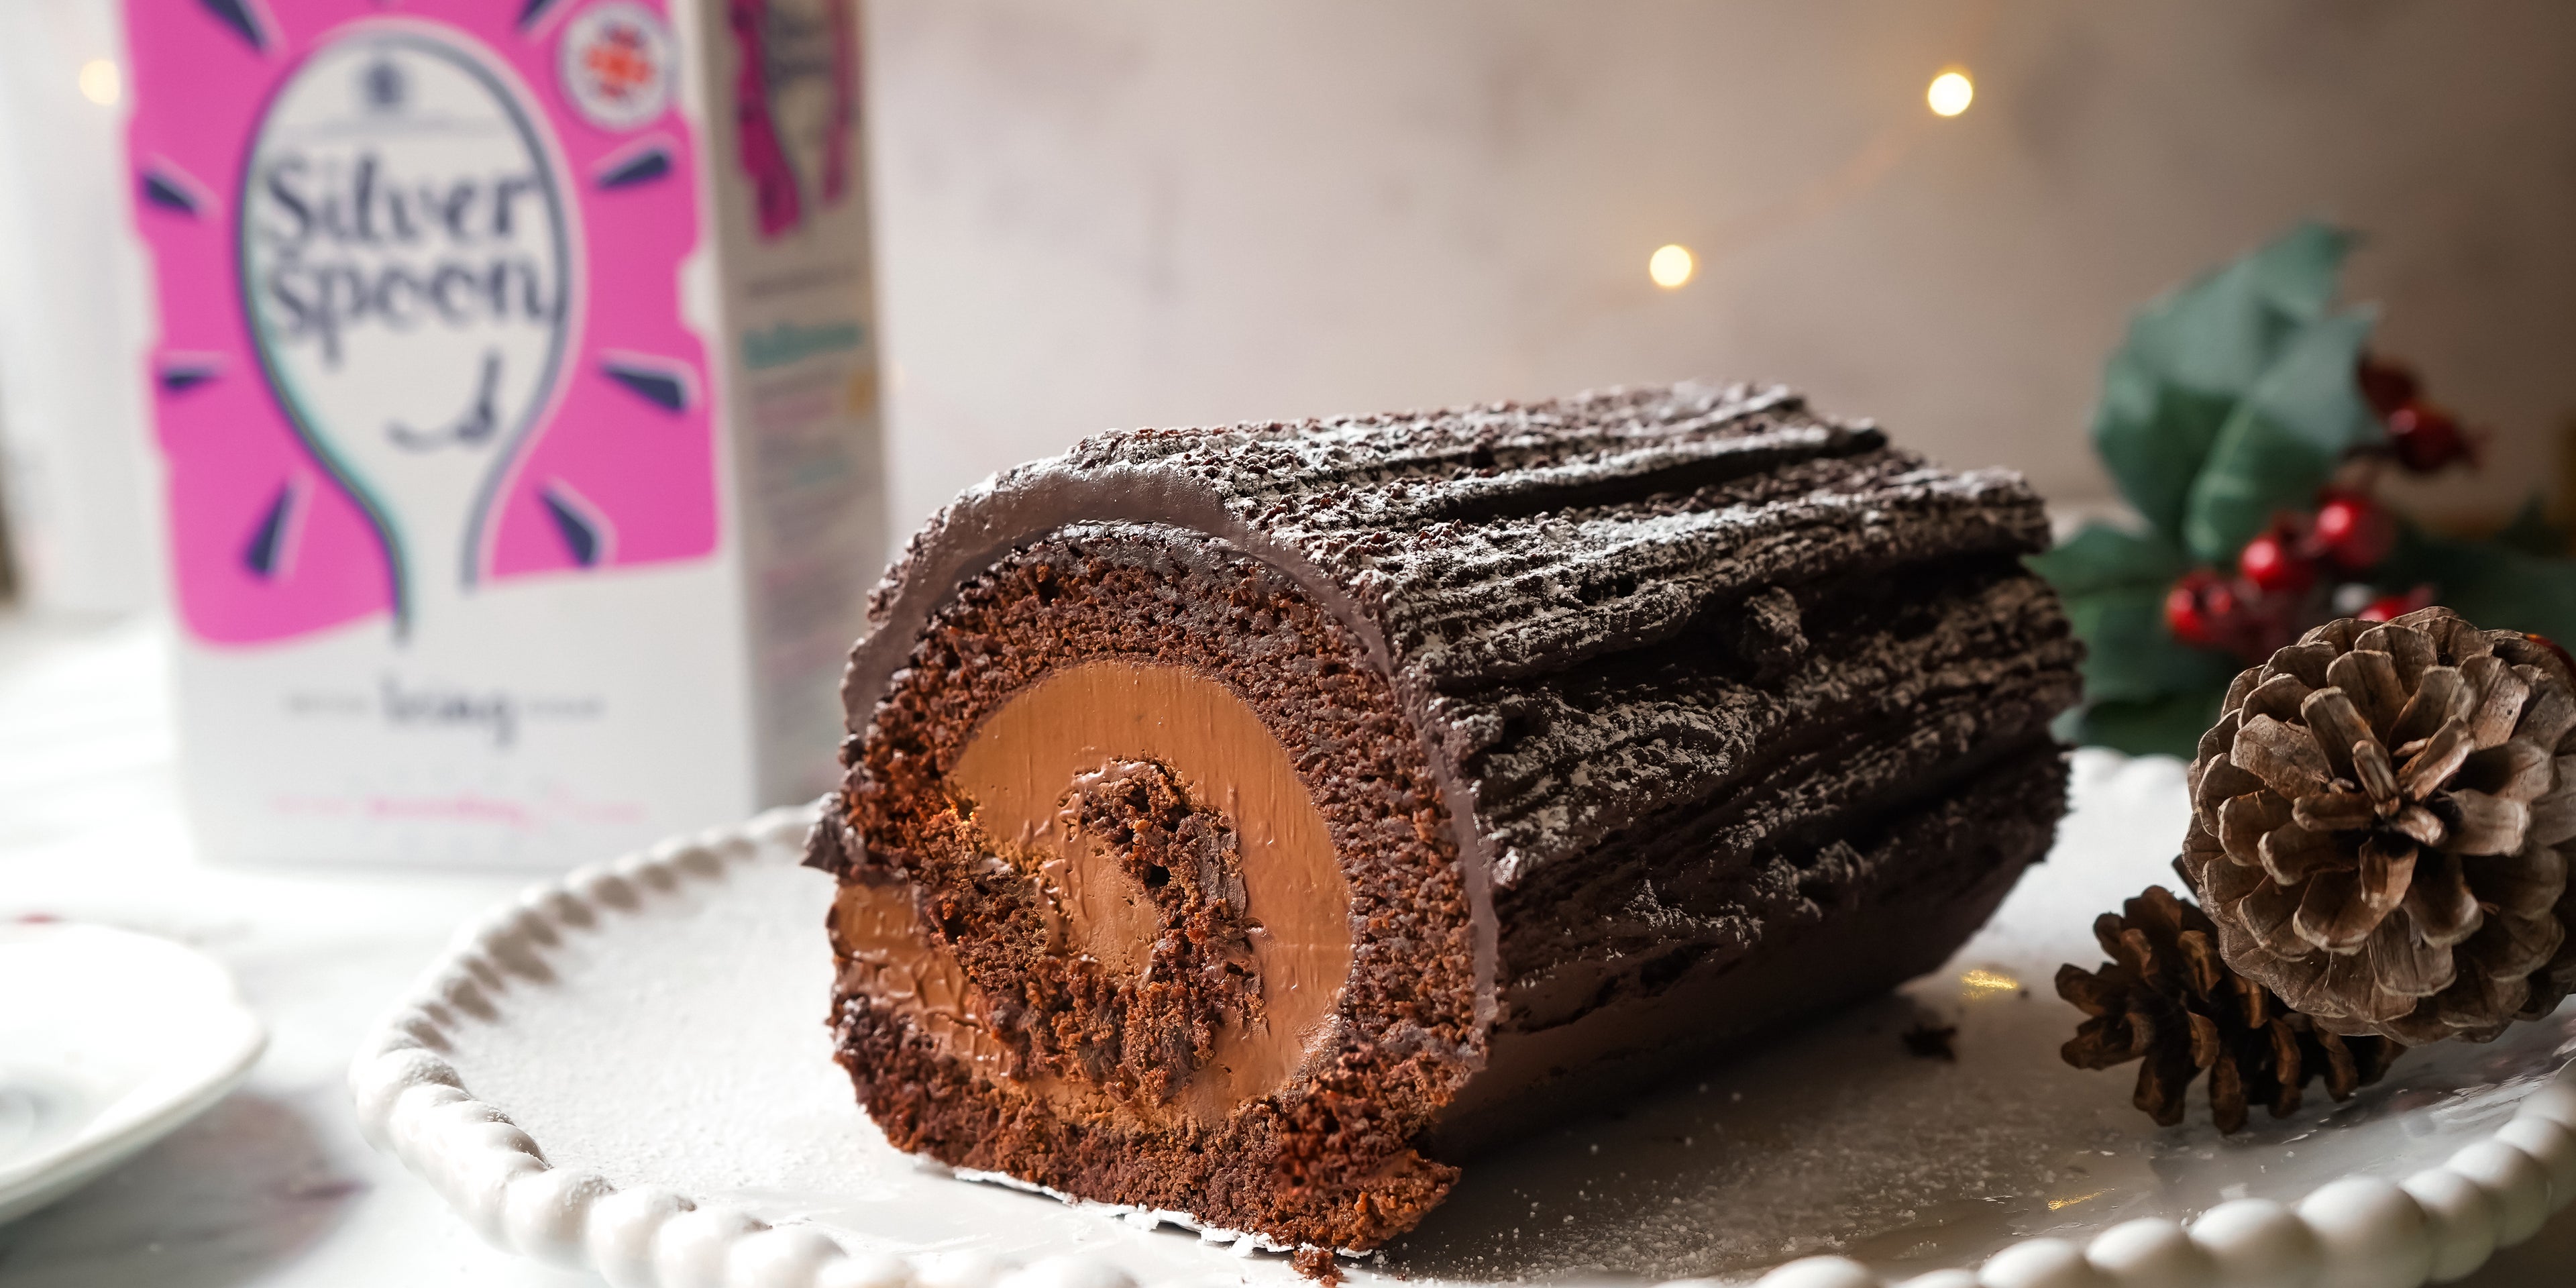 Close up Vegan Yule Log dusted in Silver Spoon icing sugar, with a box of Silver Spoon icing sugar in the background